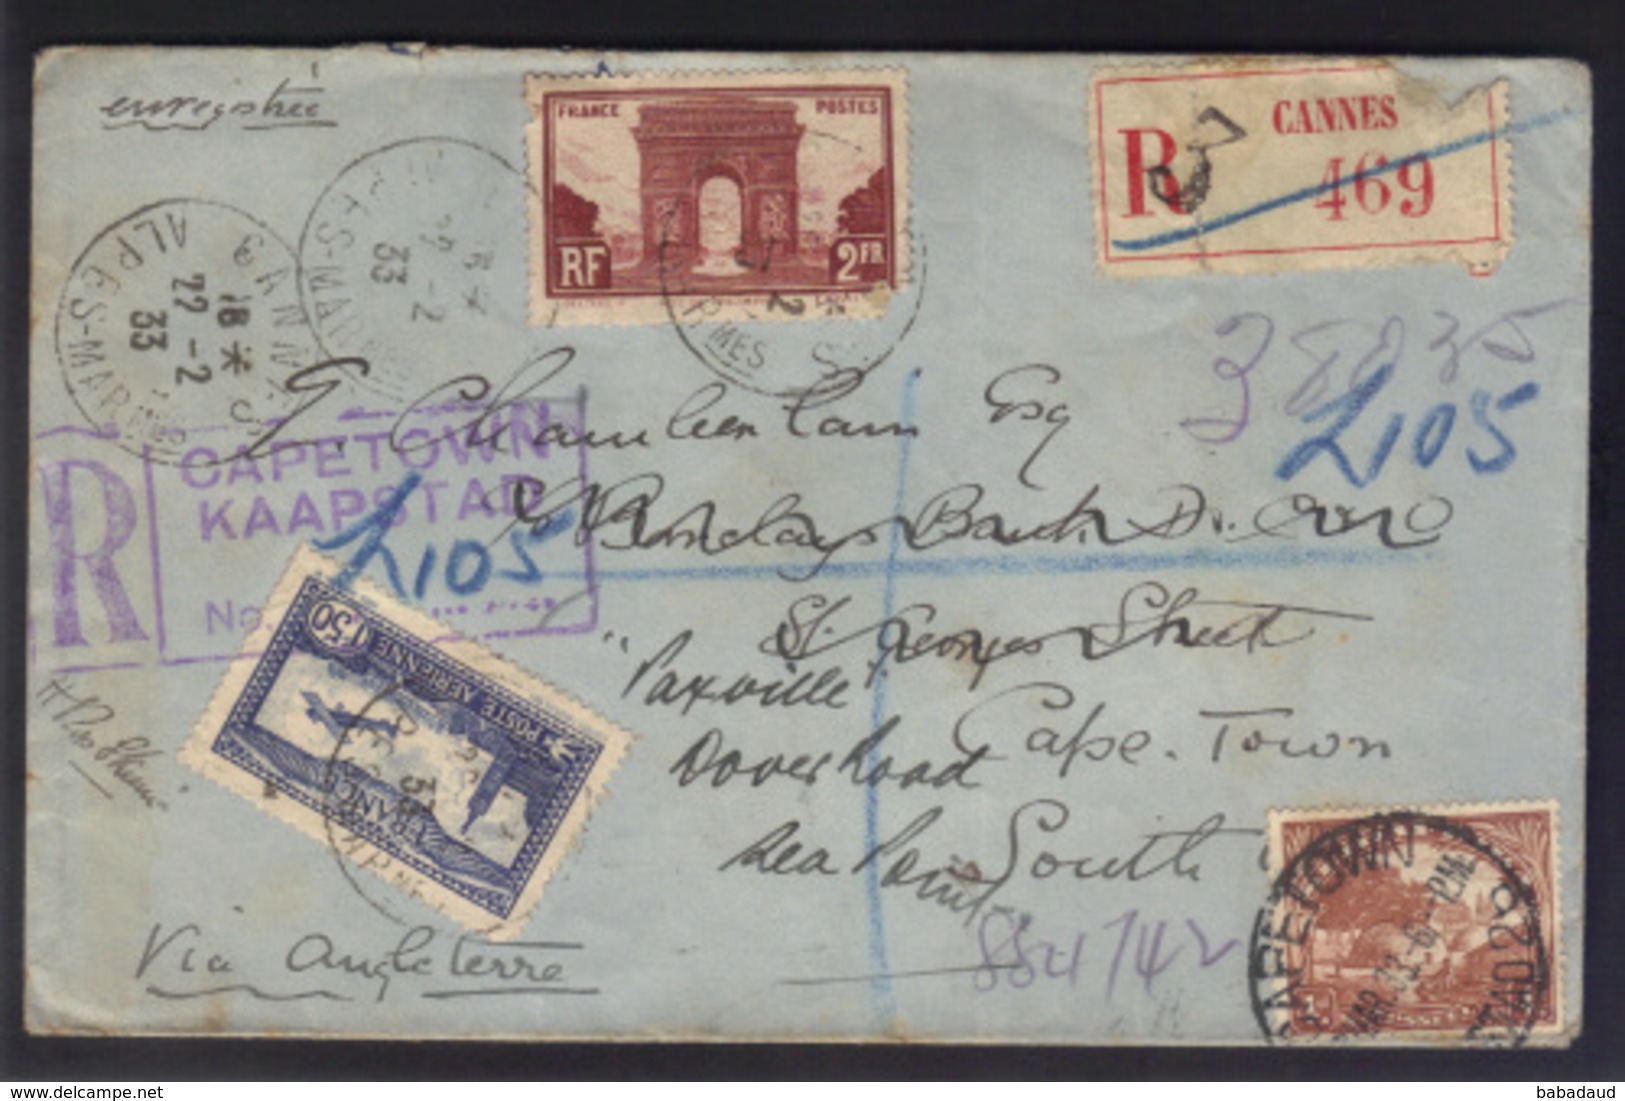 France, Registered, 3fr50 CANNES 22.2.33 > CAPETOWN + SA 3d > SeaPoint (CapeTown) - Covers & Documents